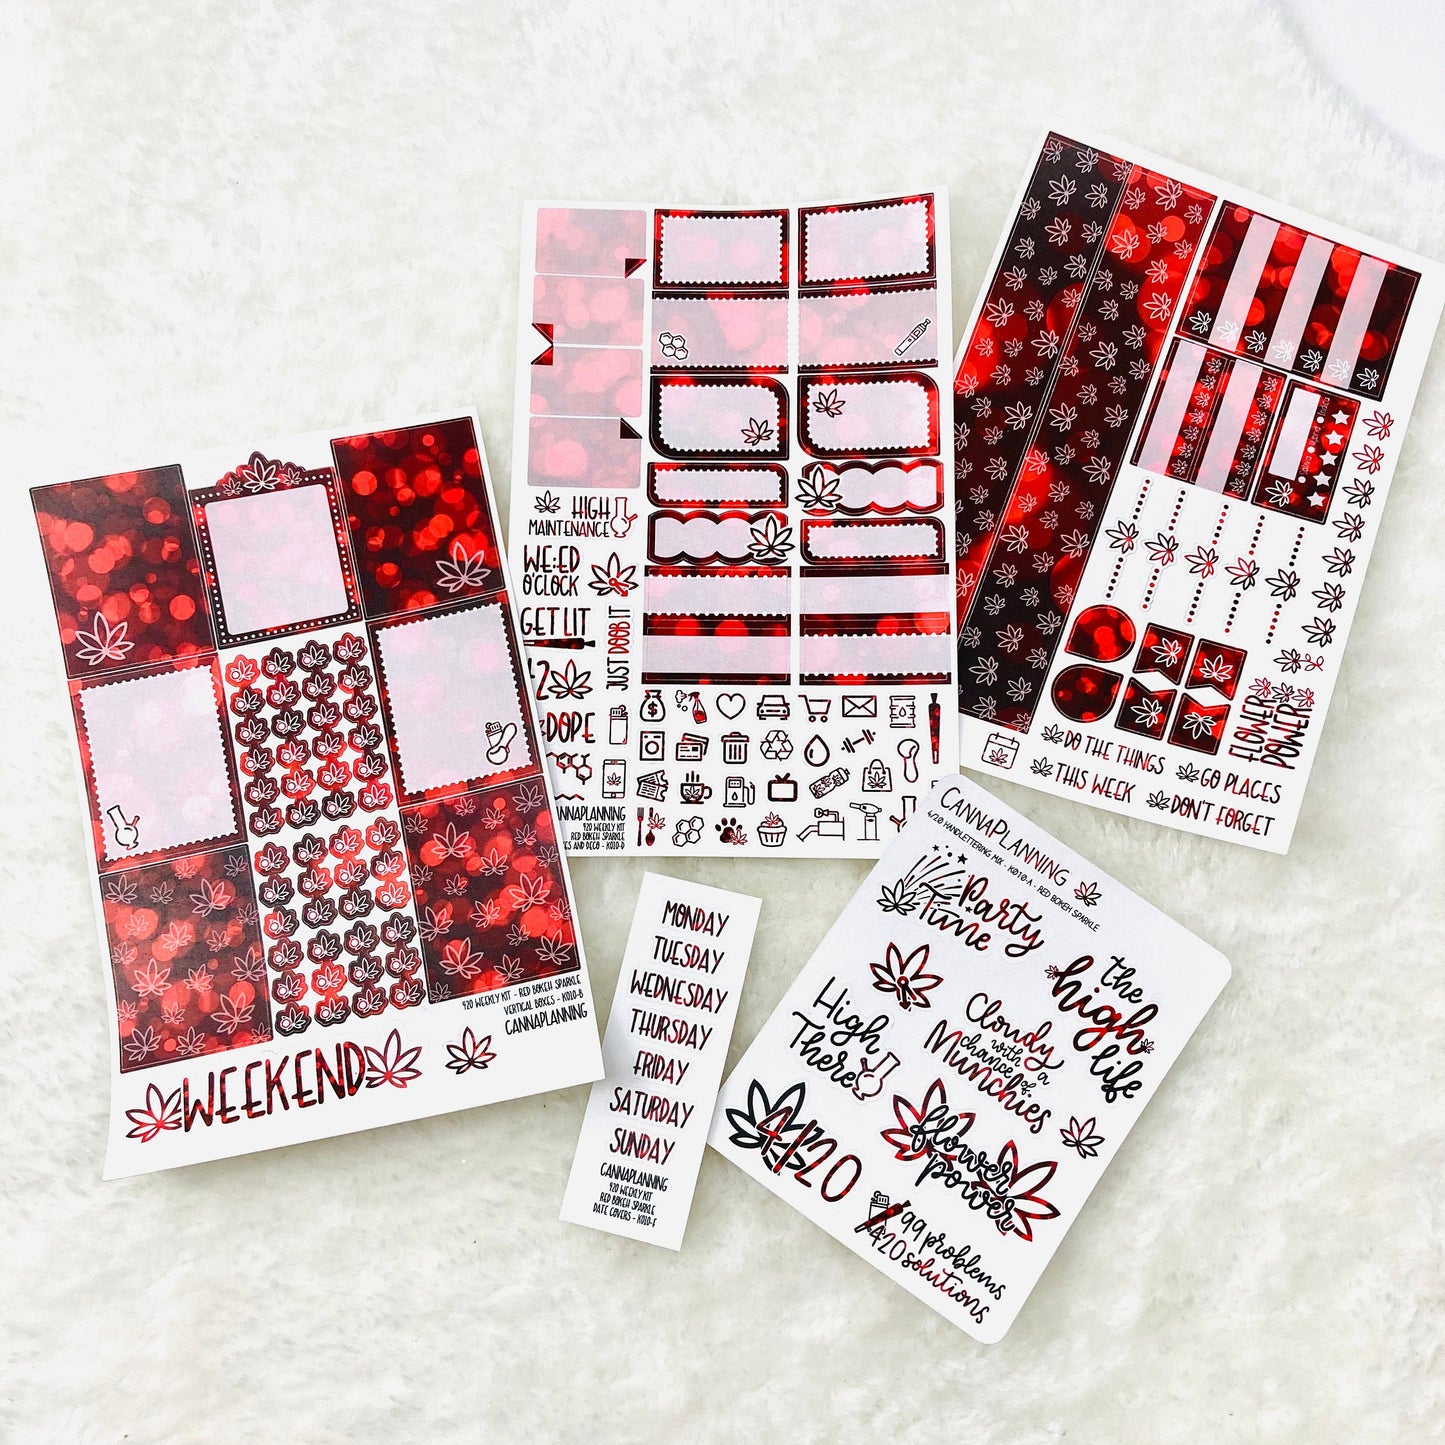 420 Weekly Sticker Kit - VERTICAL AND HORIZONTAL - Red Bokeh Sparkle | weed and cannabis planner sticker kit and scrapbook accessories (6596127490225)